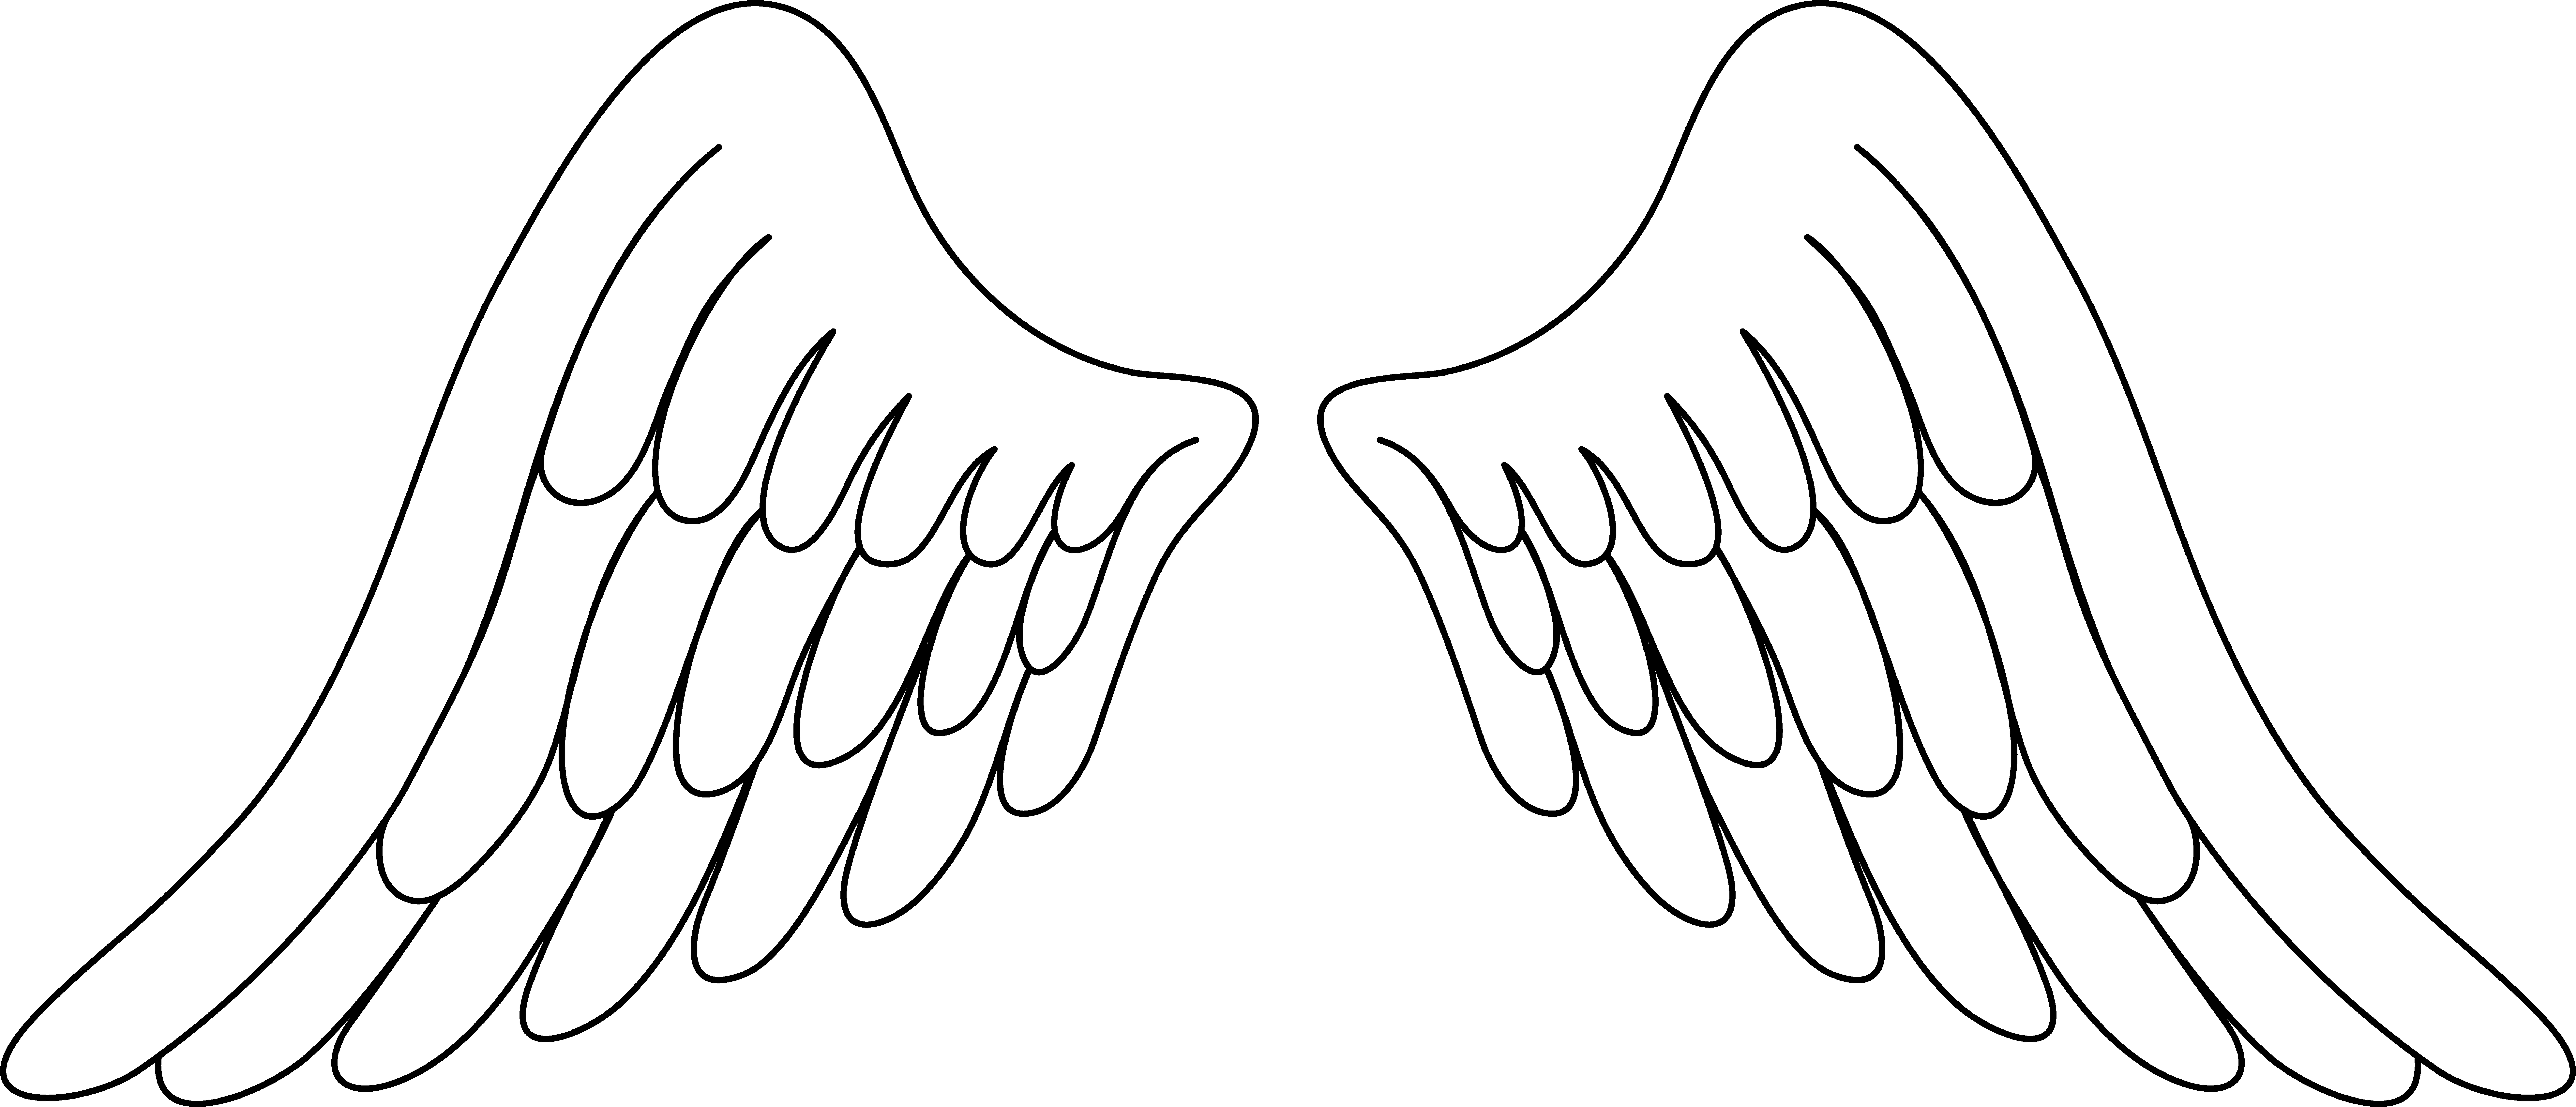 Words clipart angel. Wings wing clip art